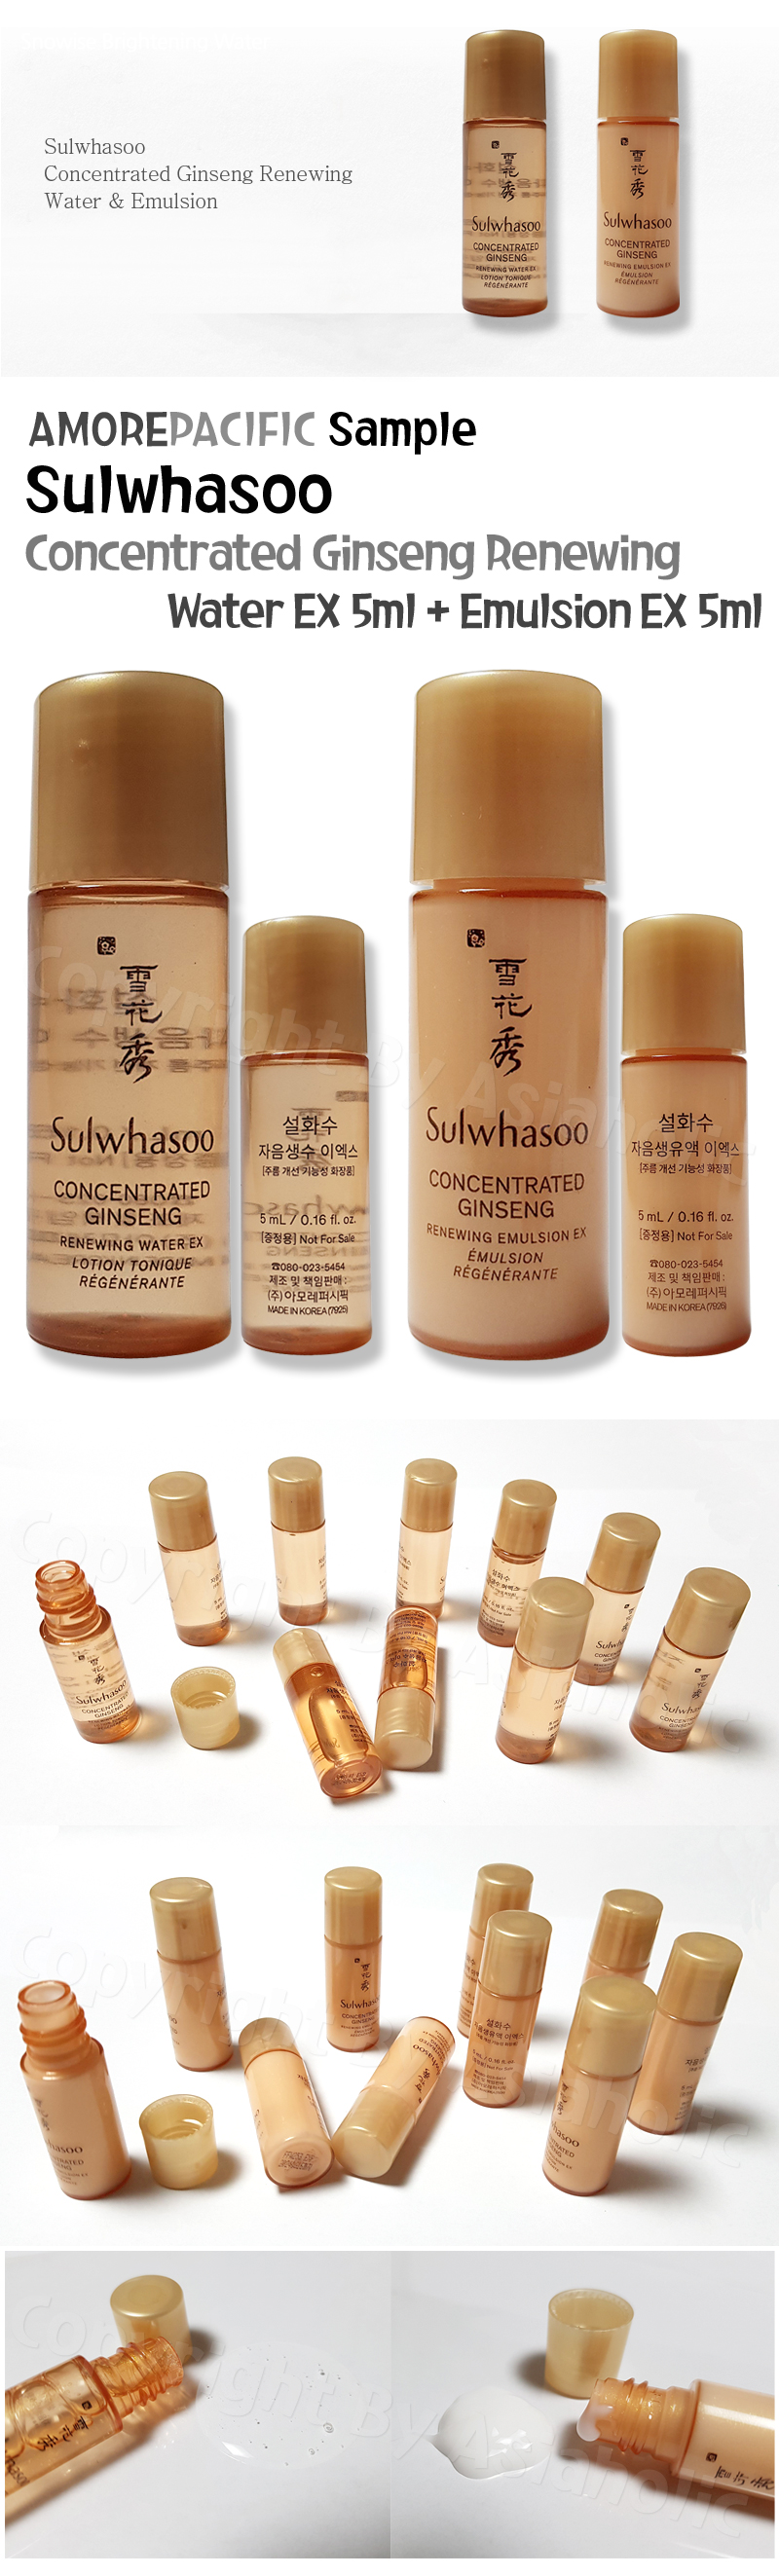 Sulwhasoo Concentrated Ginseng Renewing 5ml Water EX (9pcs) + Emulsion EX (9pcs) Total 18pcs Sample Newest Version